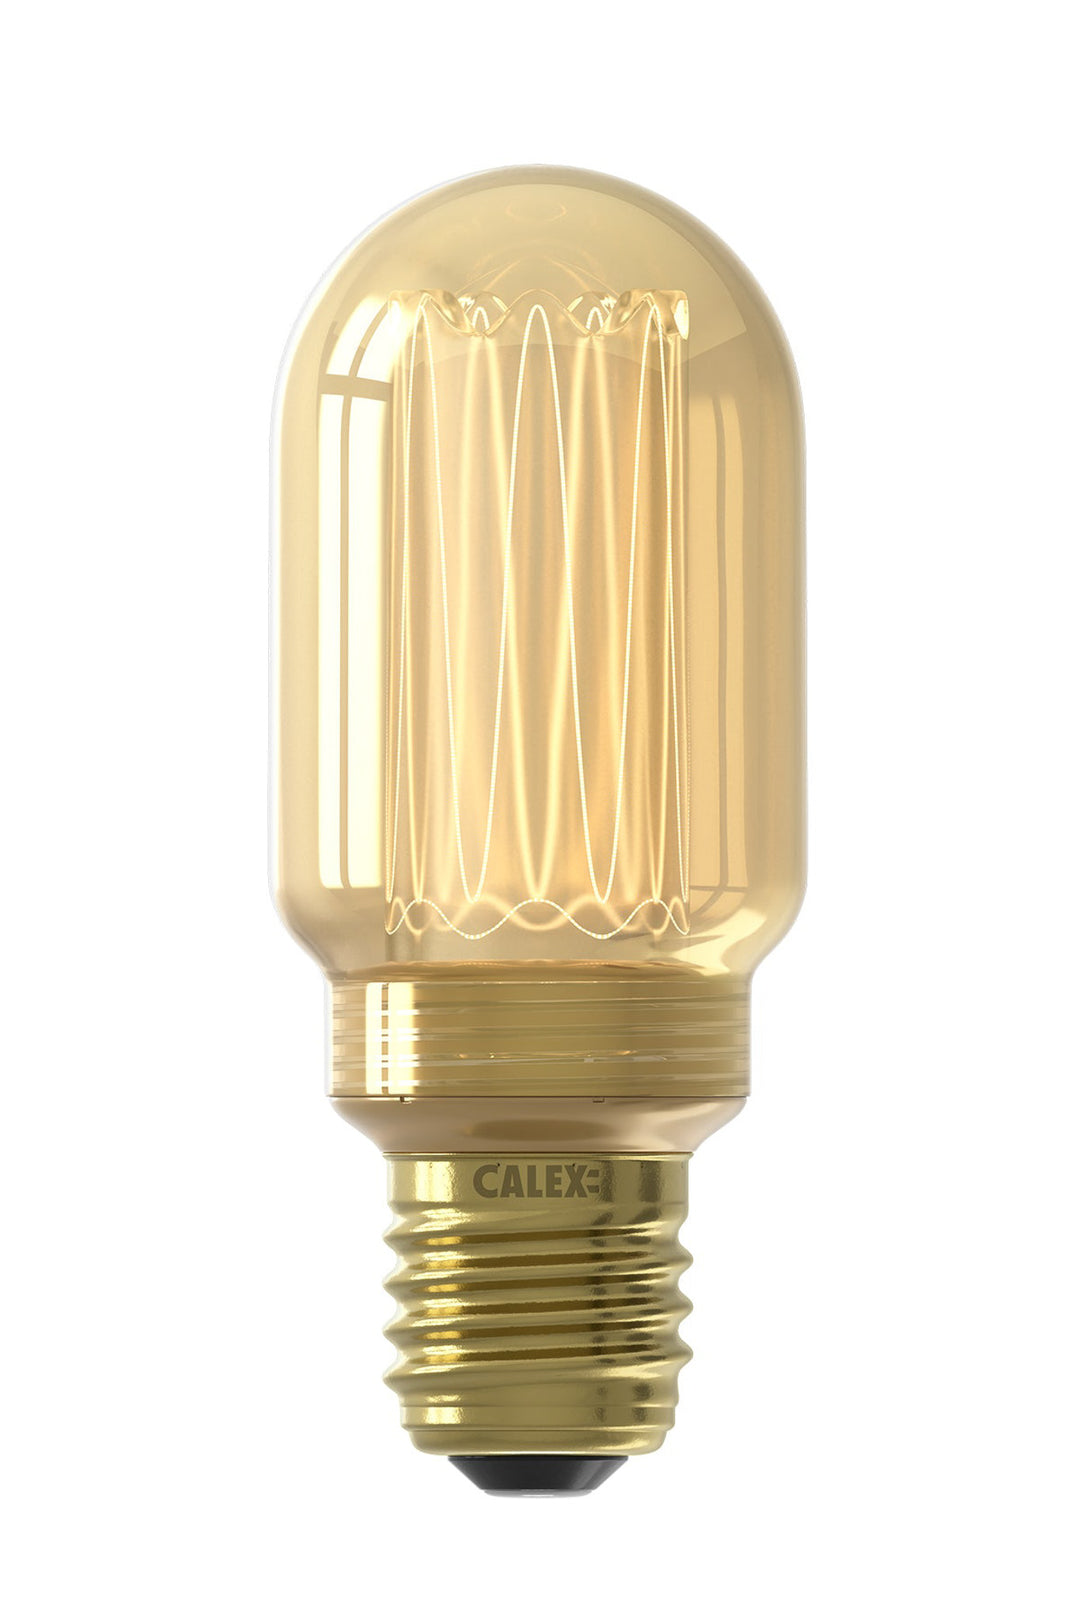 Calex LED Glass Fibre Tube T45 Gold, E27, Dimmable with LED Dimmer 1201001200